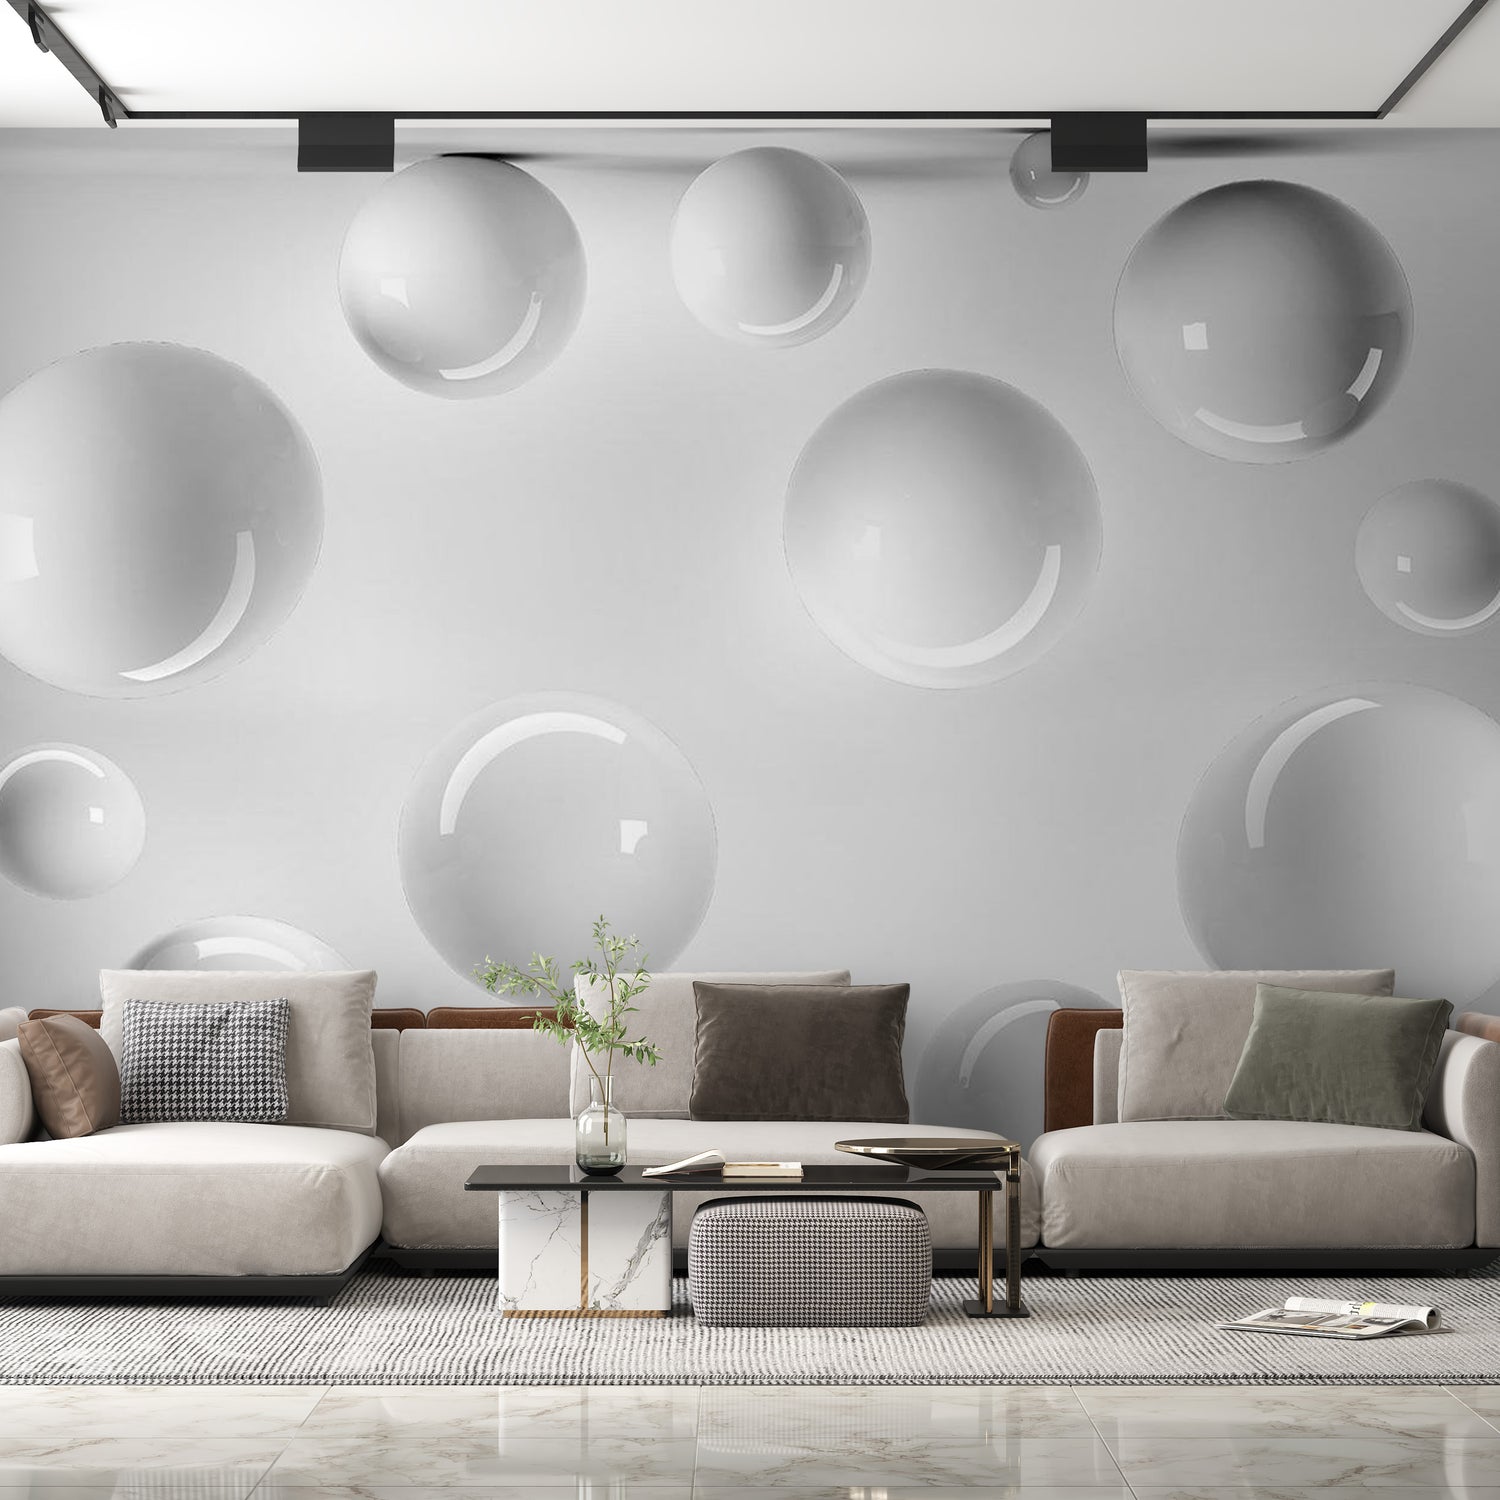 Peel & Stick 3D Illusion Wall Mural - Balls - Removable Wall Decals